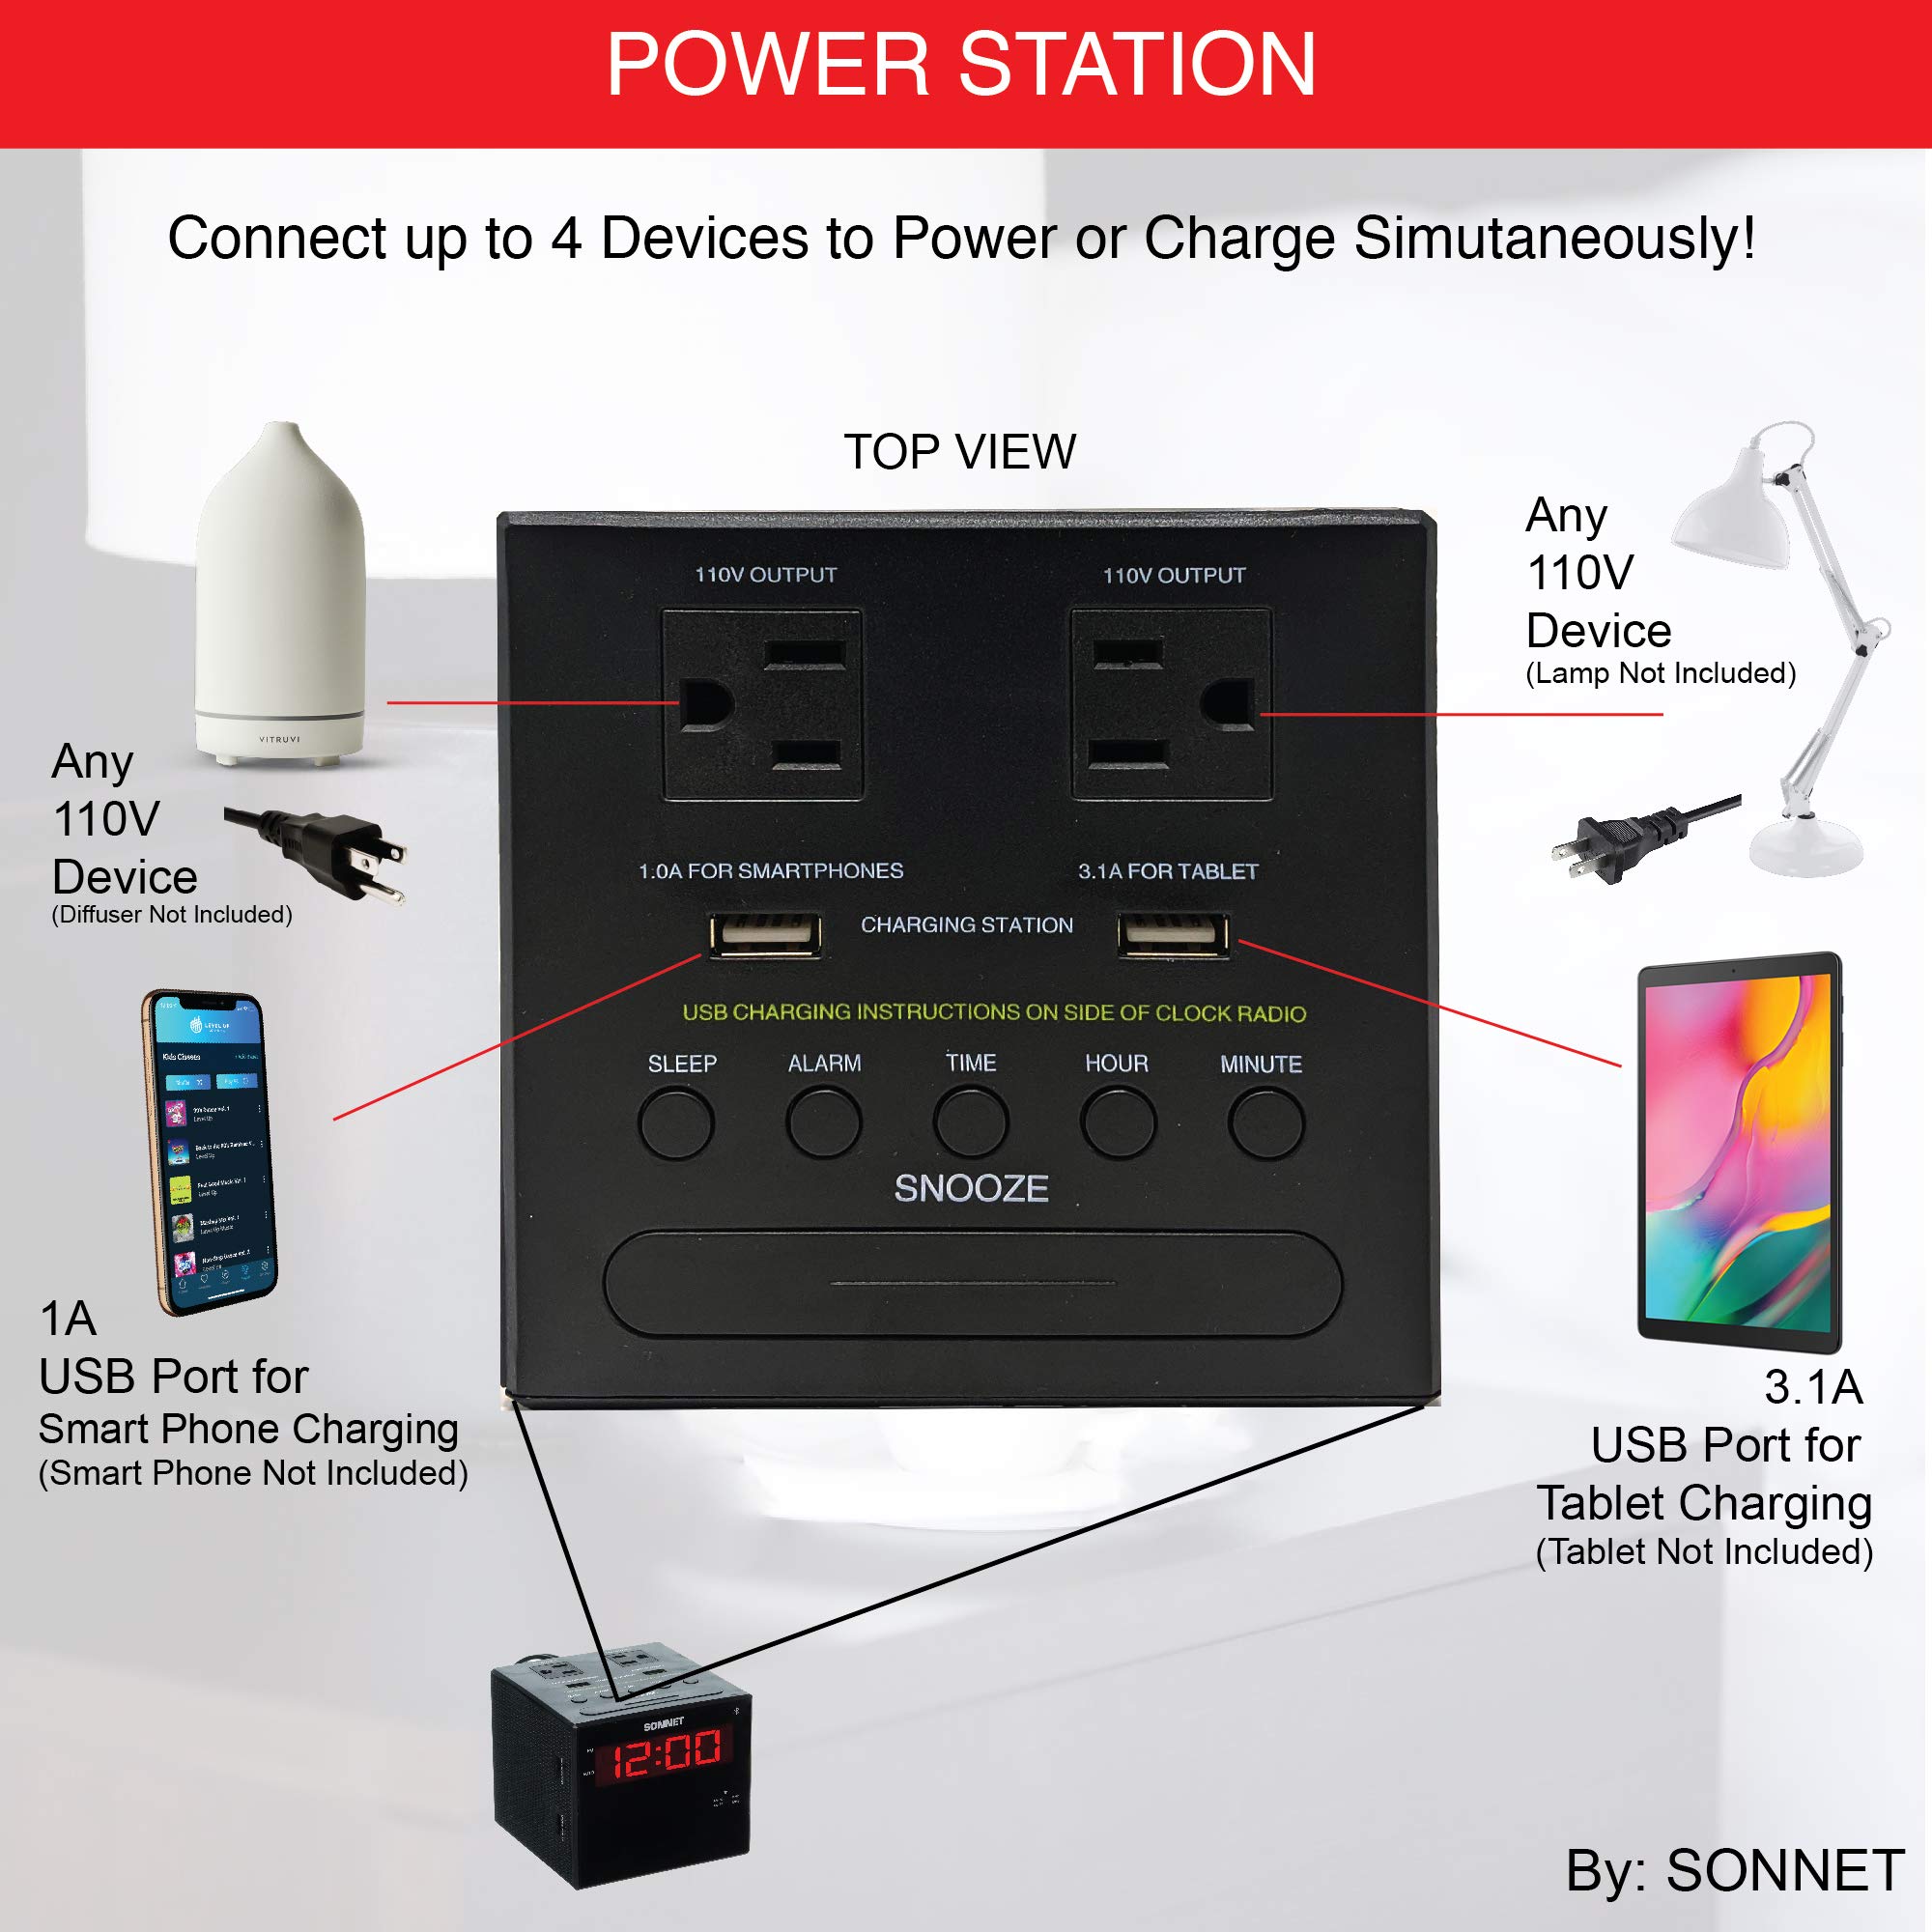 Sonnet Alarm Clock Charging Station, Bluetooth Speaker, AM FM Radio, Dual USB Charging Ports, Dual AC Outlets, Very Loud Alarm Clock for Heavy Sleepers and The Hearing Impaired for Desk, Bedroom